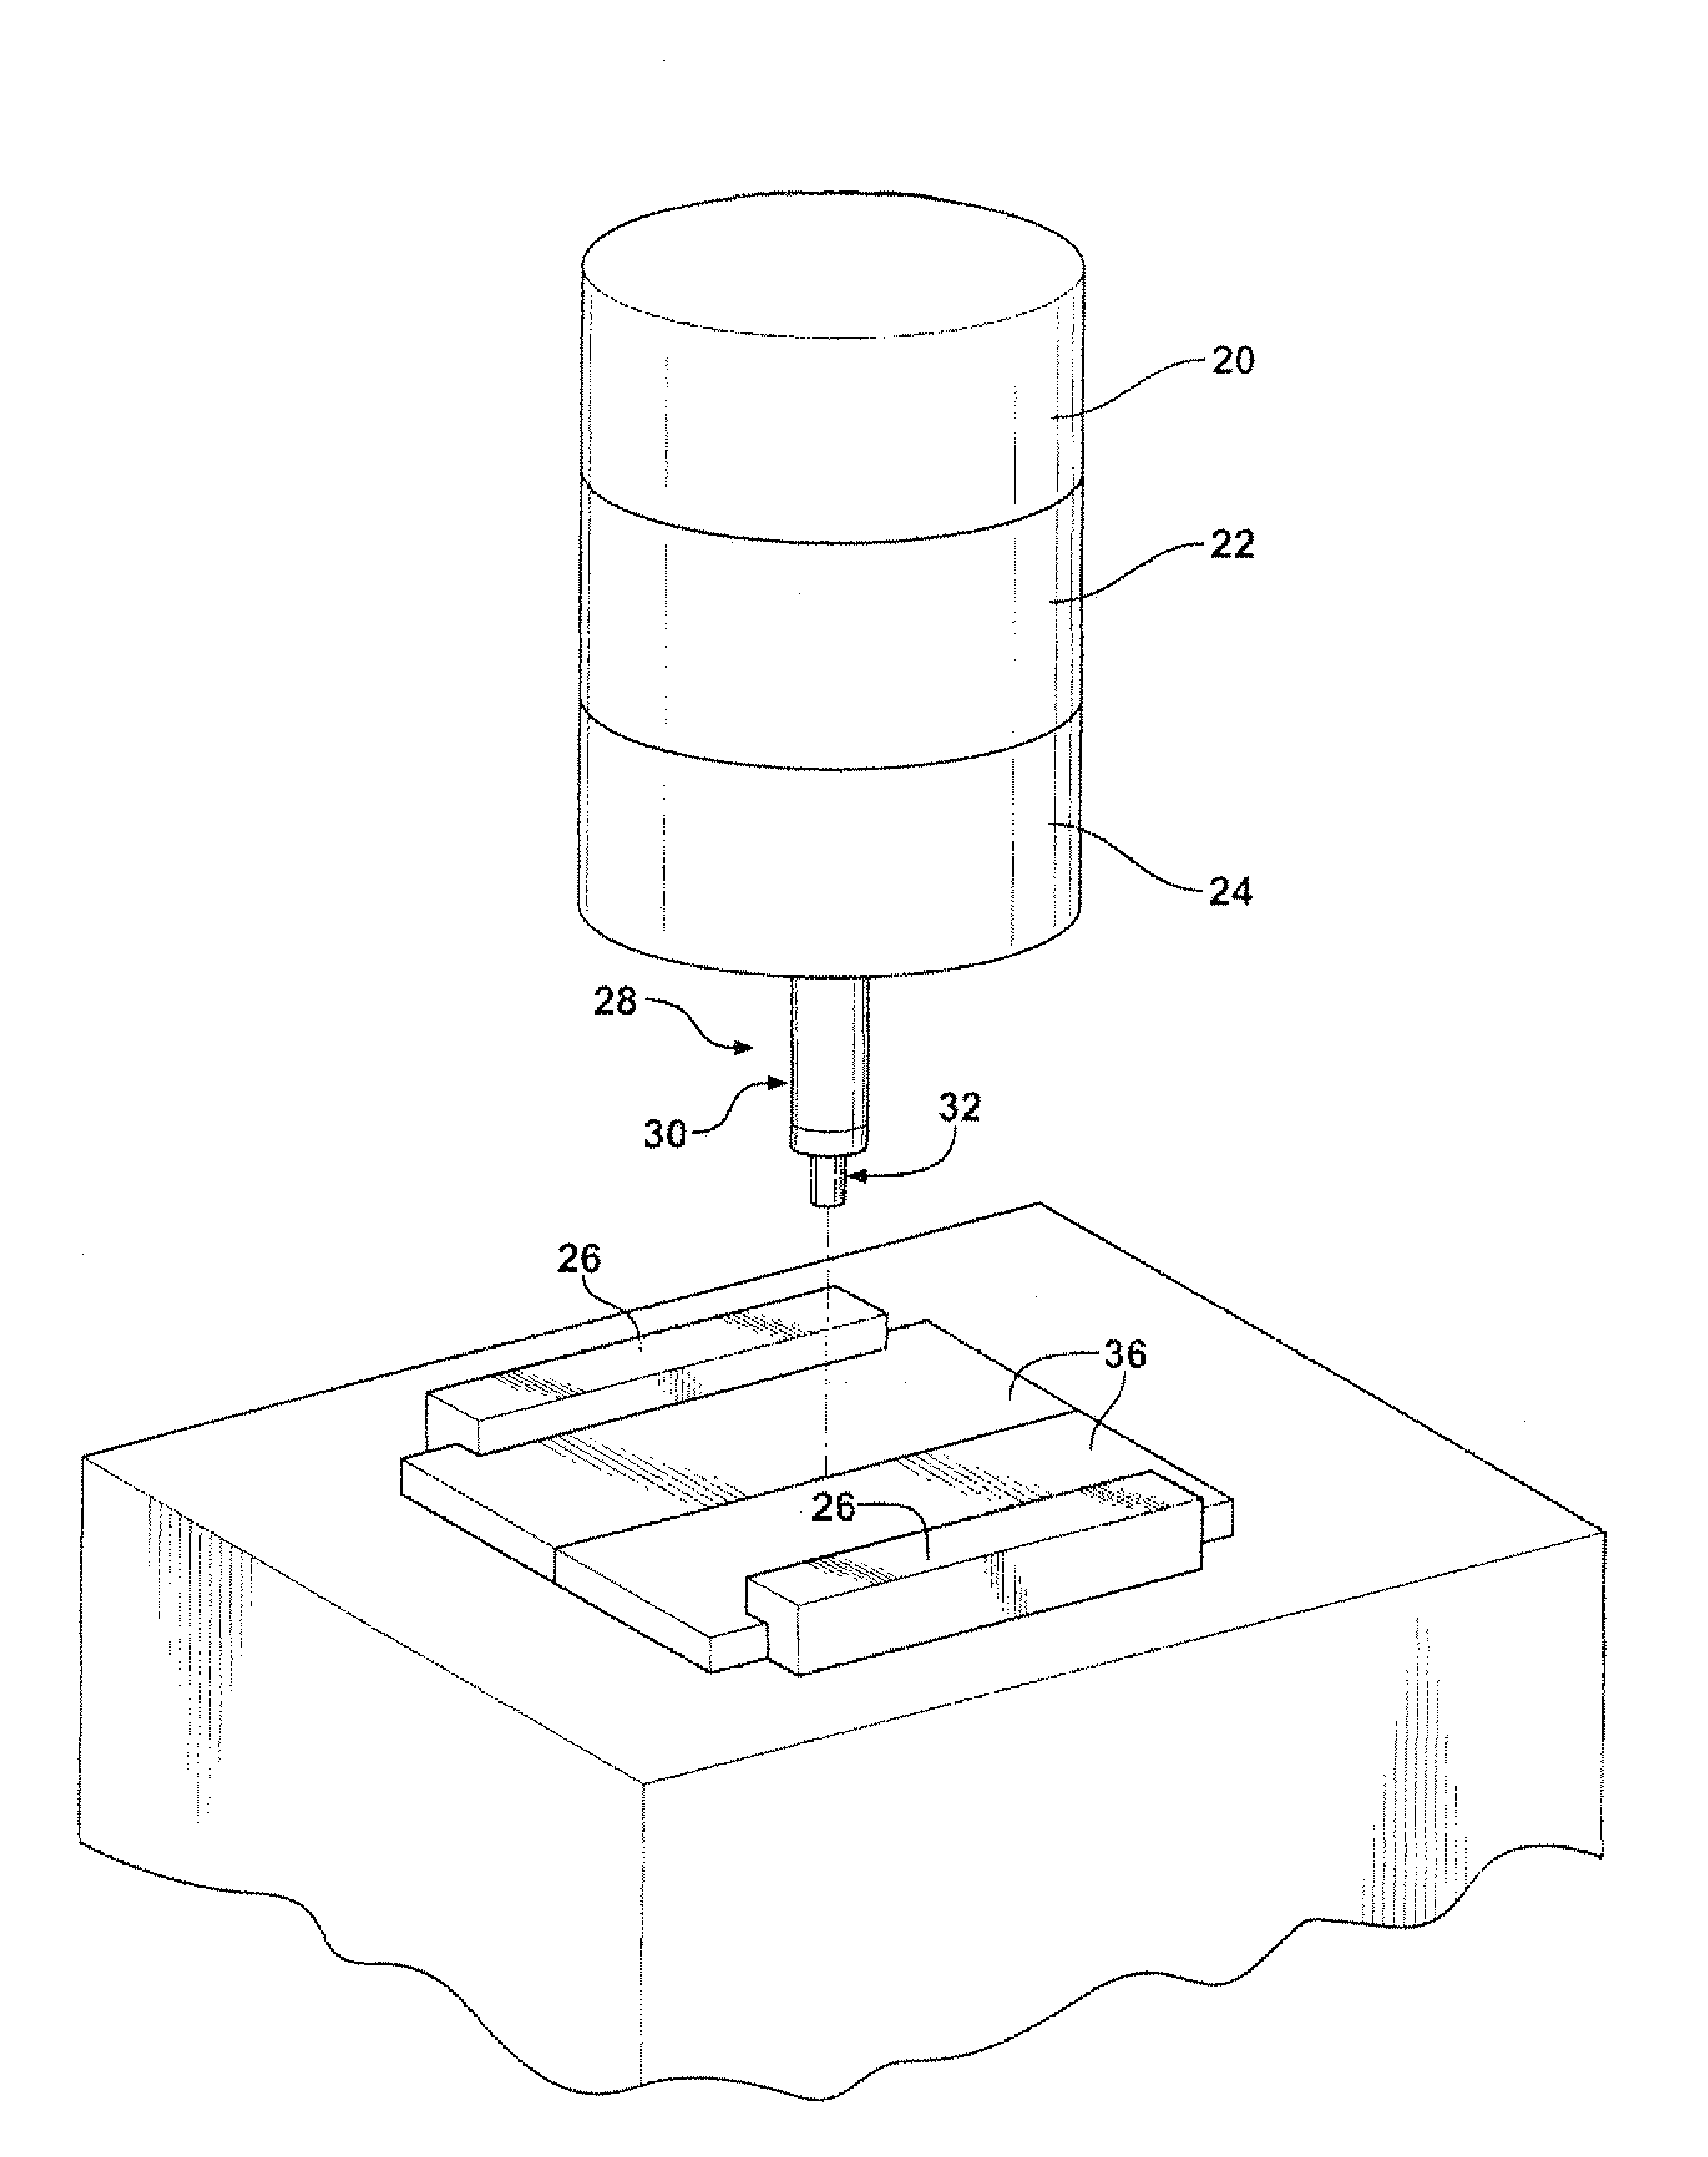 Powder metal ultrasonic welding tool and method of manufacture thereof